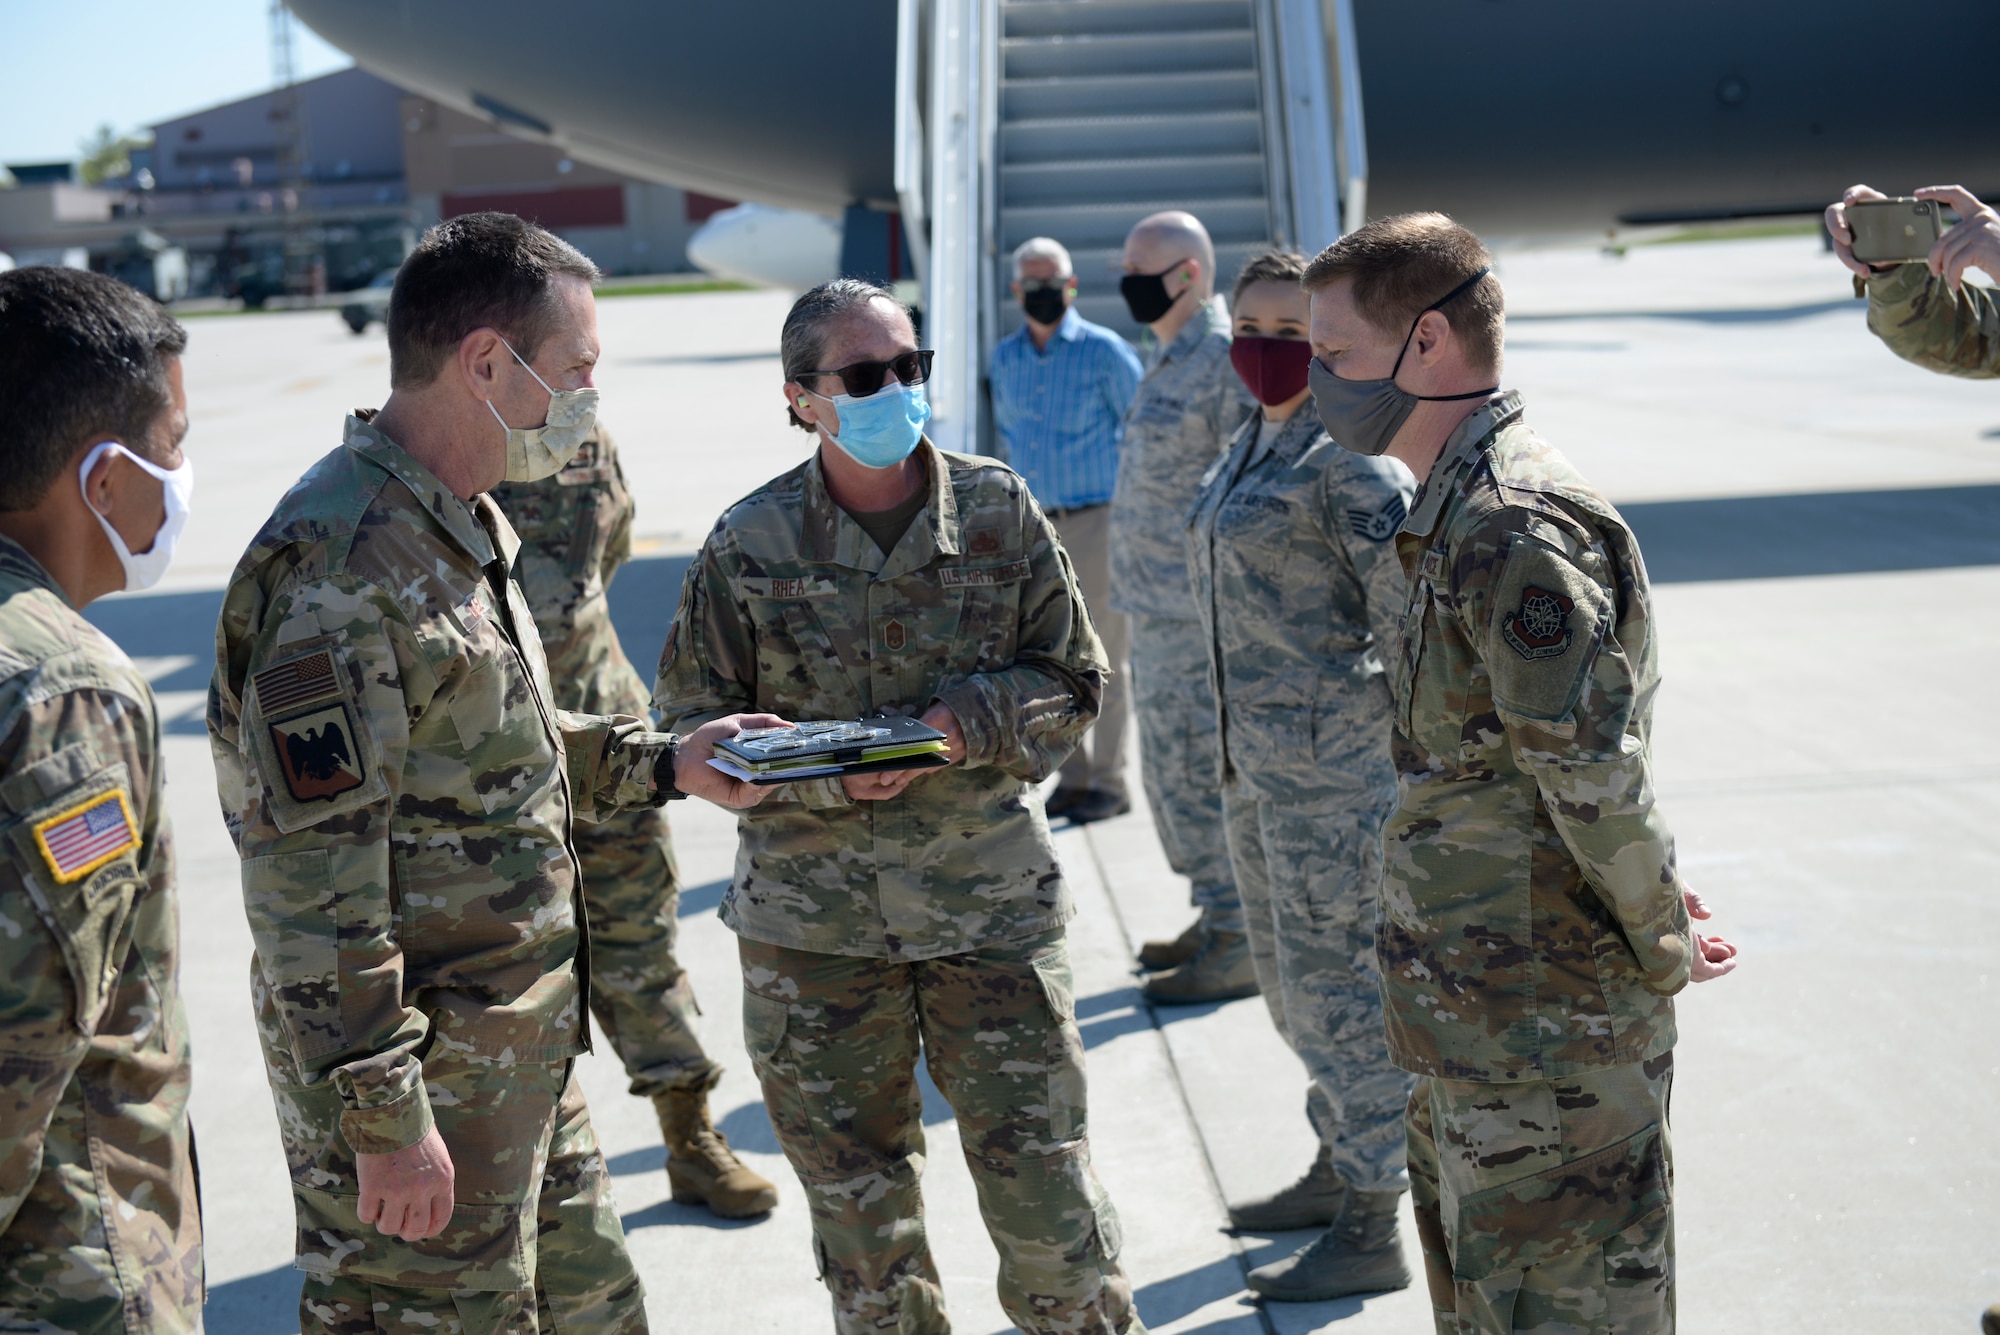 During his visit to Pease Air National Guard Base, Newington, N.HH., Gen. Joseph L. Lengyel, the Chief of the National Guard Bureau, presents a coin to Tech. Sgt. Andrew Morrison, a 157th Air Refueling Wing maintainer, for recent outstanding performance, May 27, 2020. (U.S. Air National Guard photo by Senior Master Sgt. Timm Huffman)